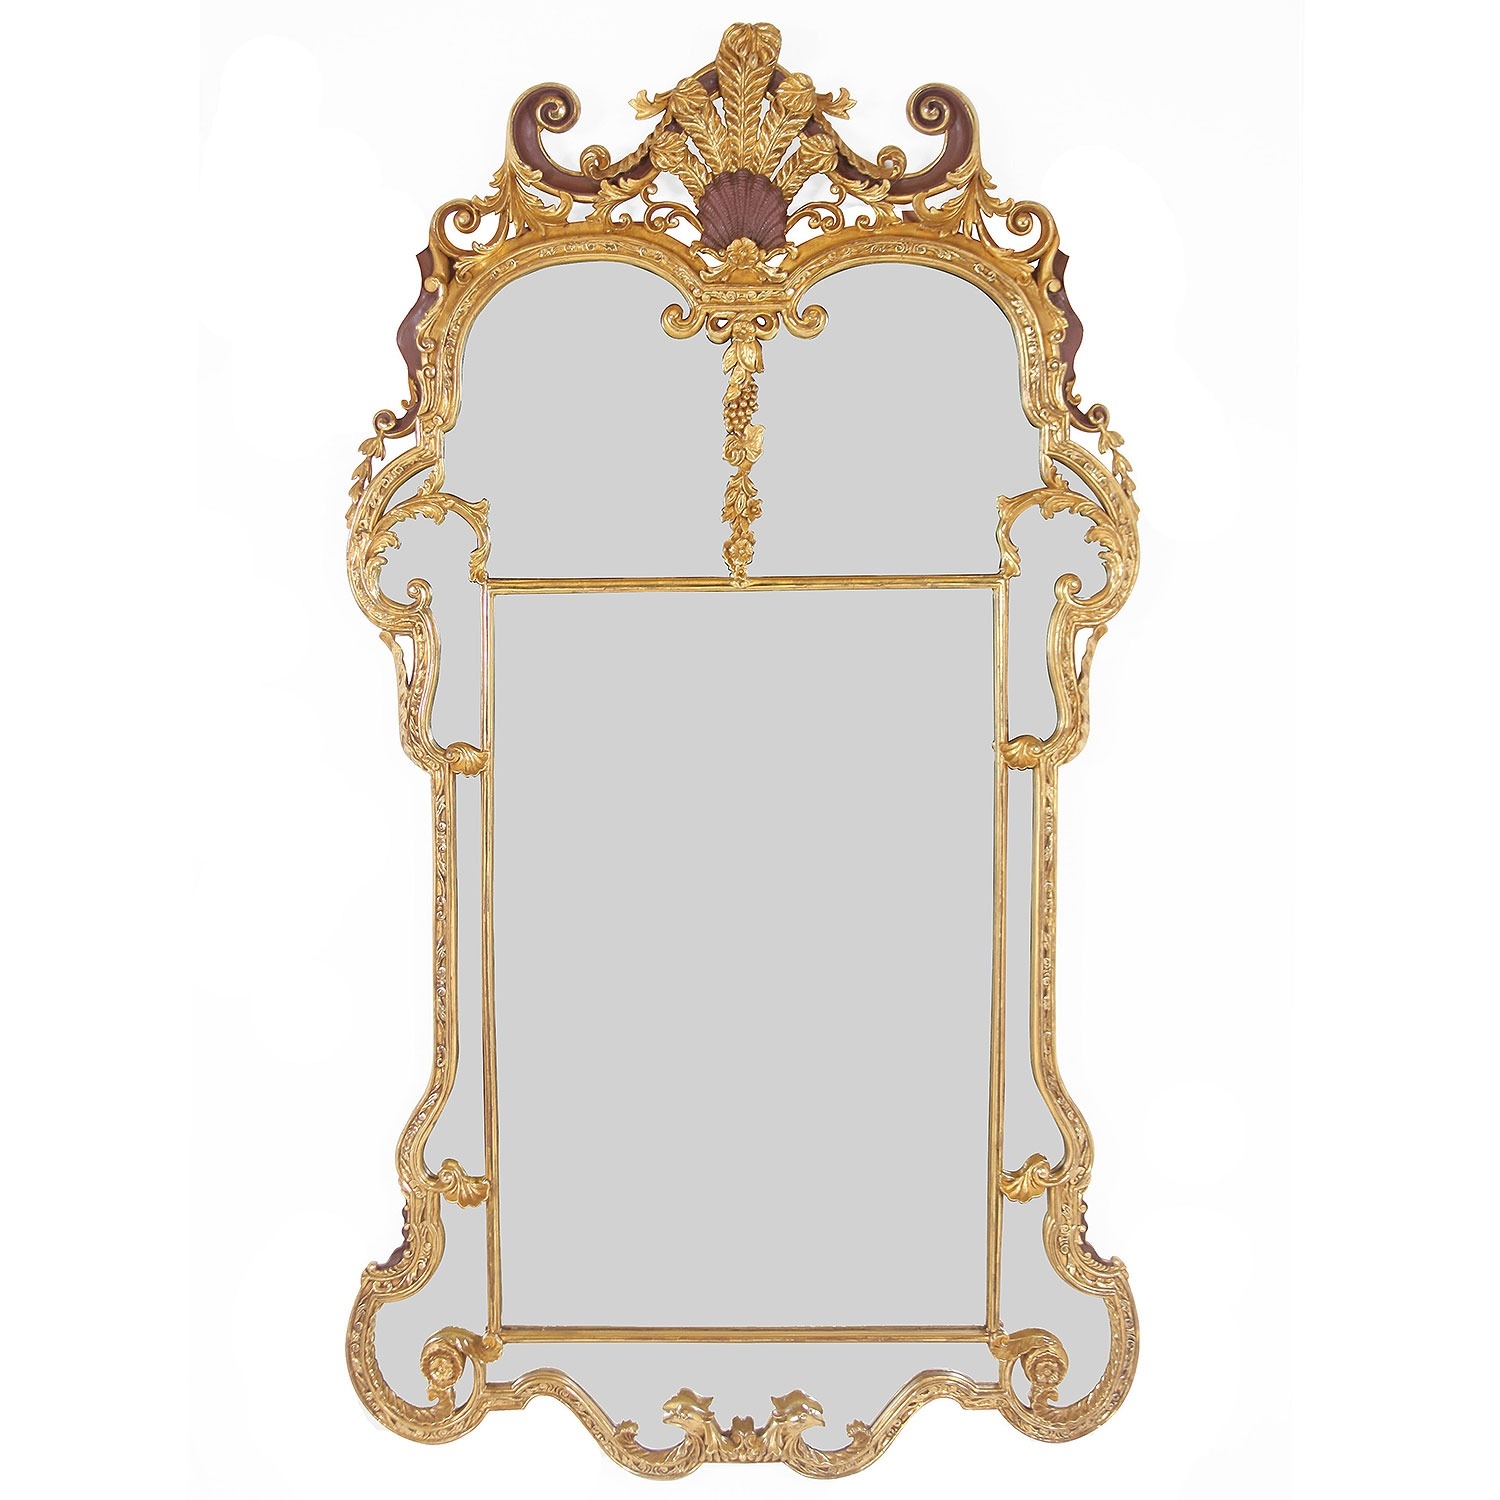 Period water gilded mirror